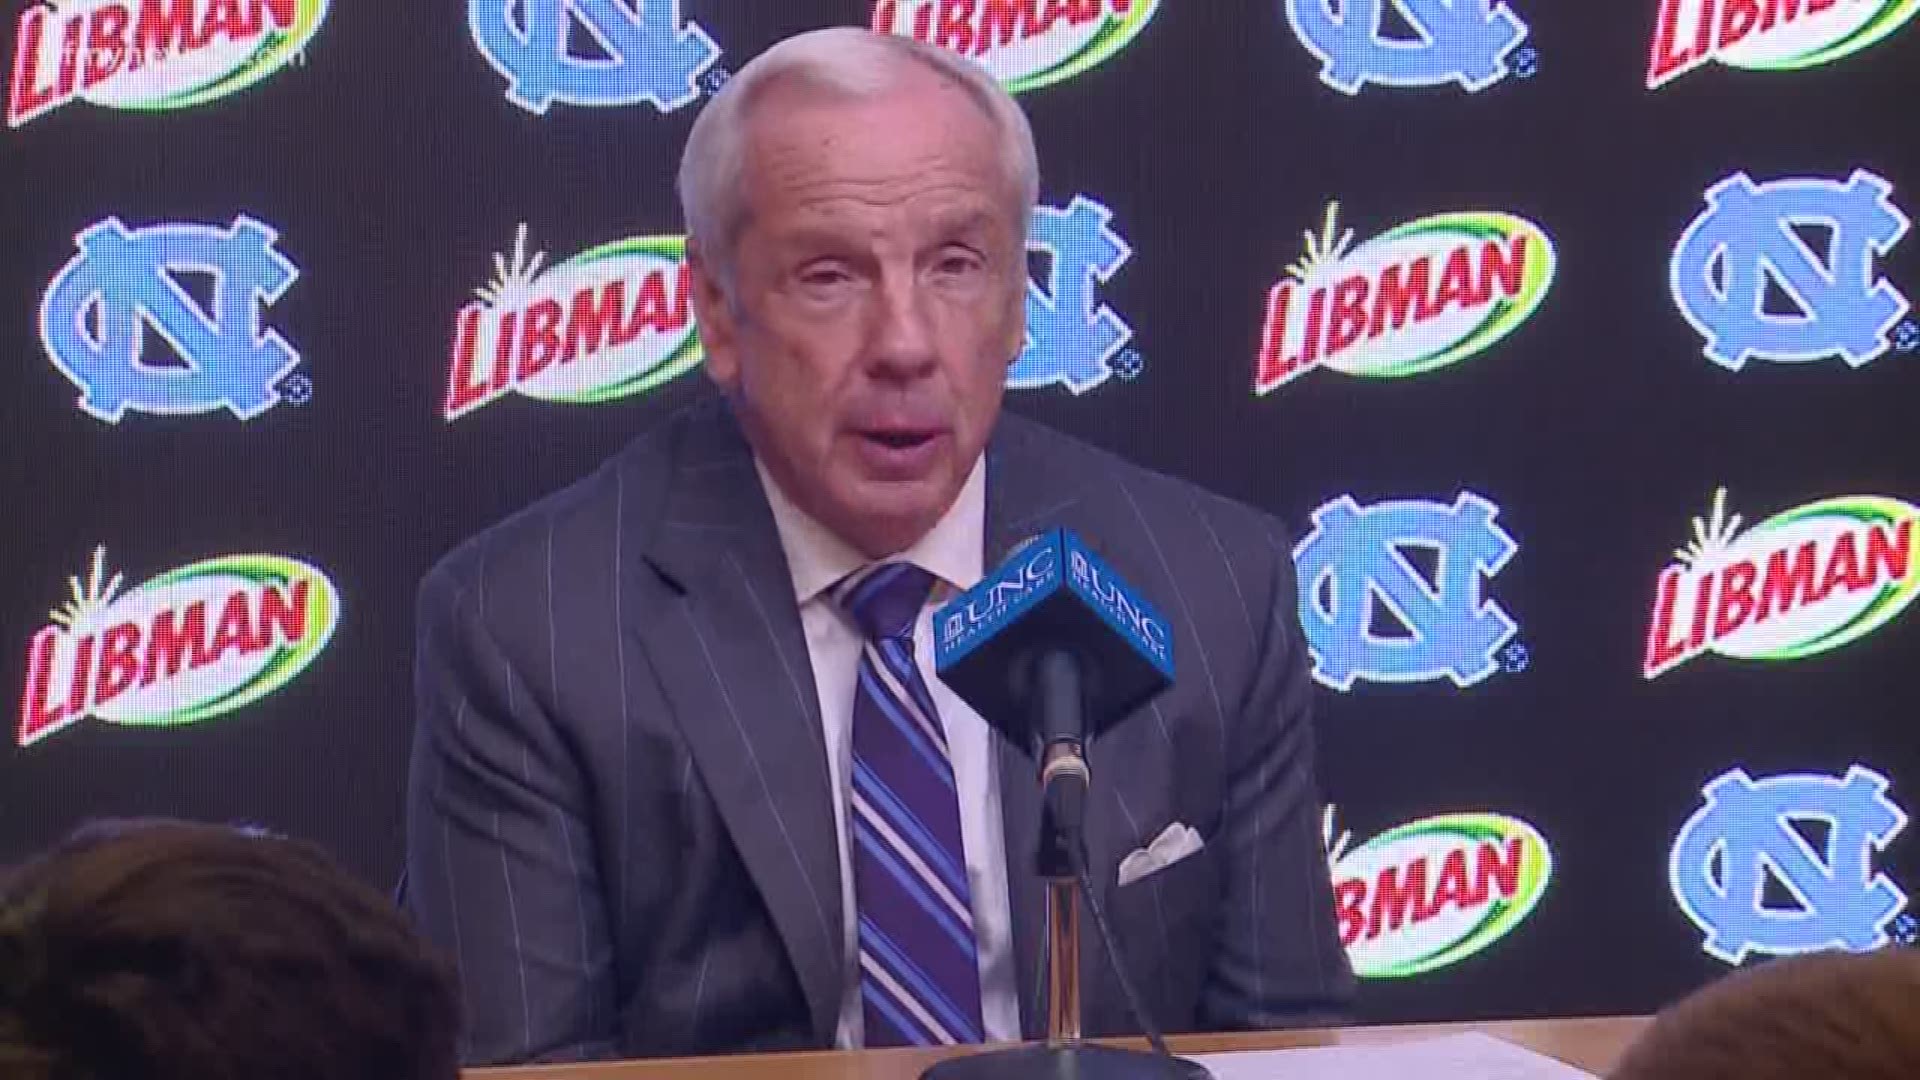 After nearly a month without a win, UNC beats Miami, as Roy Williams passes Dean Smith on the all-time wins list.